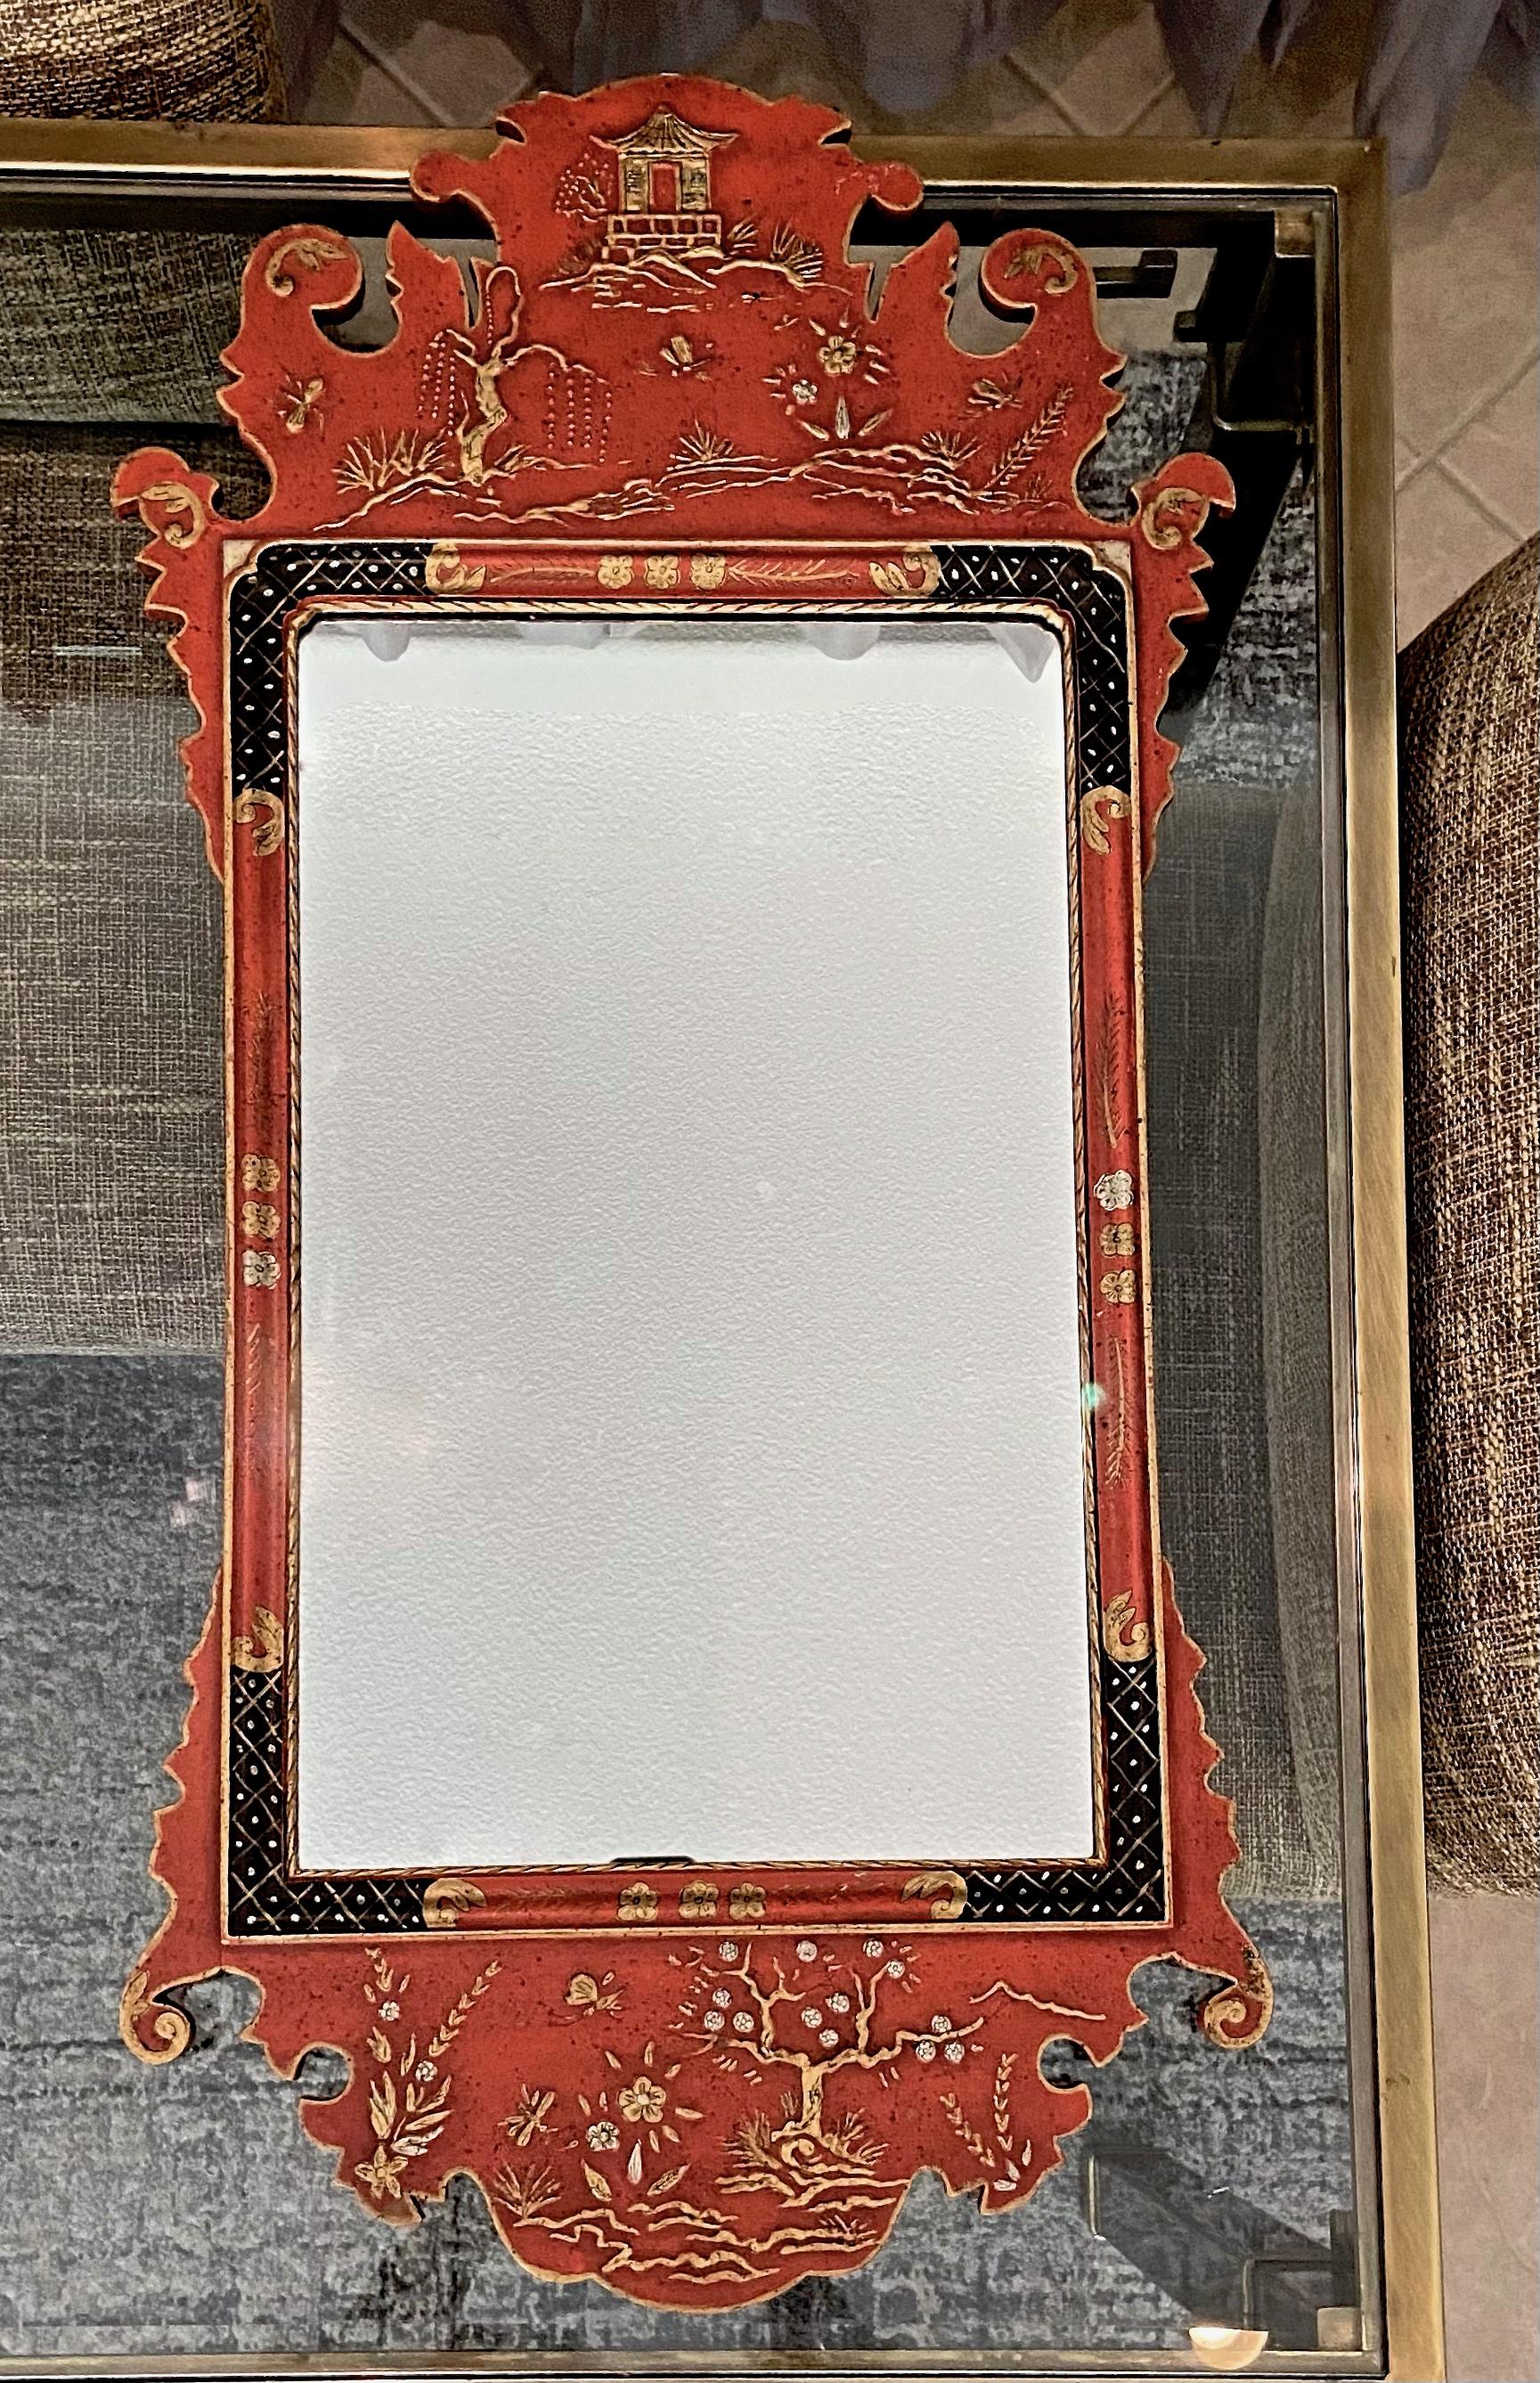 Red Chinese chippendale style wall mirror by Palladio of Italy. Wood frame hand painted. Label on back 